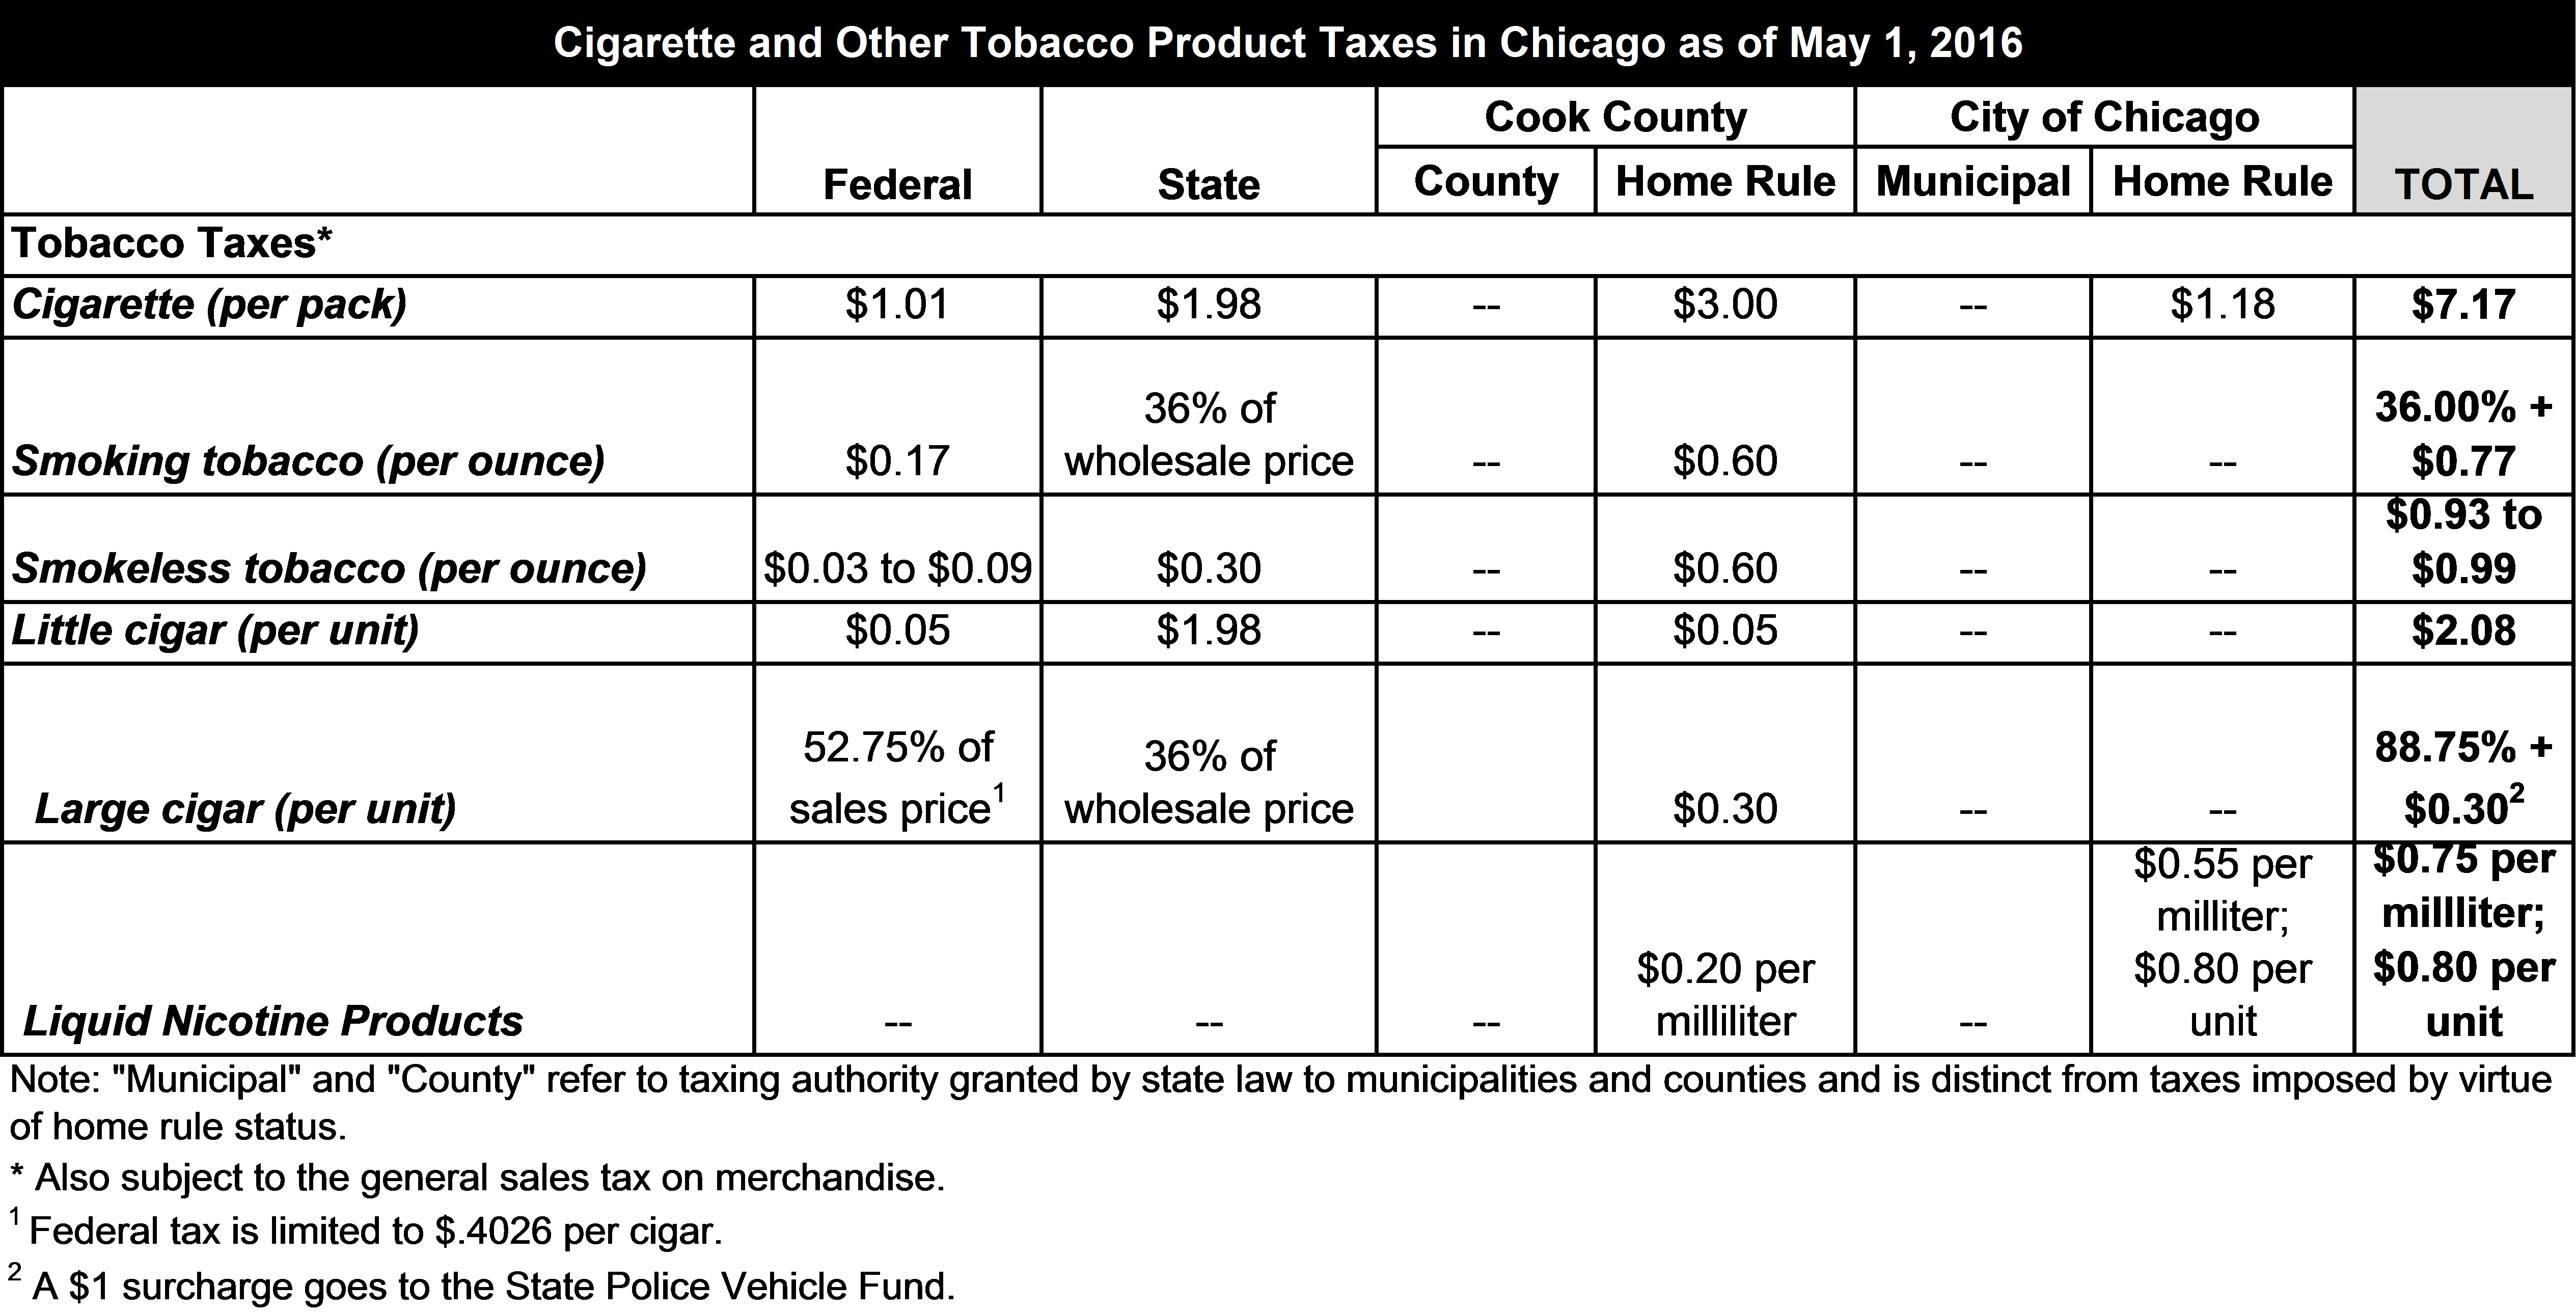 tobacco-taxes-chicago.png